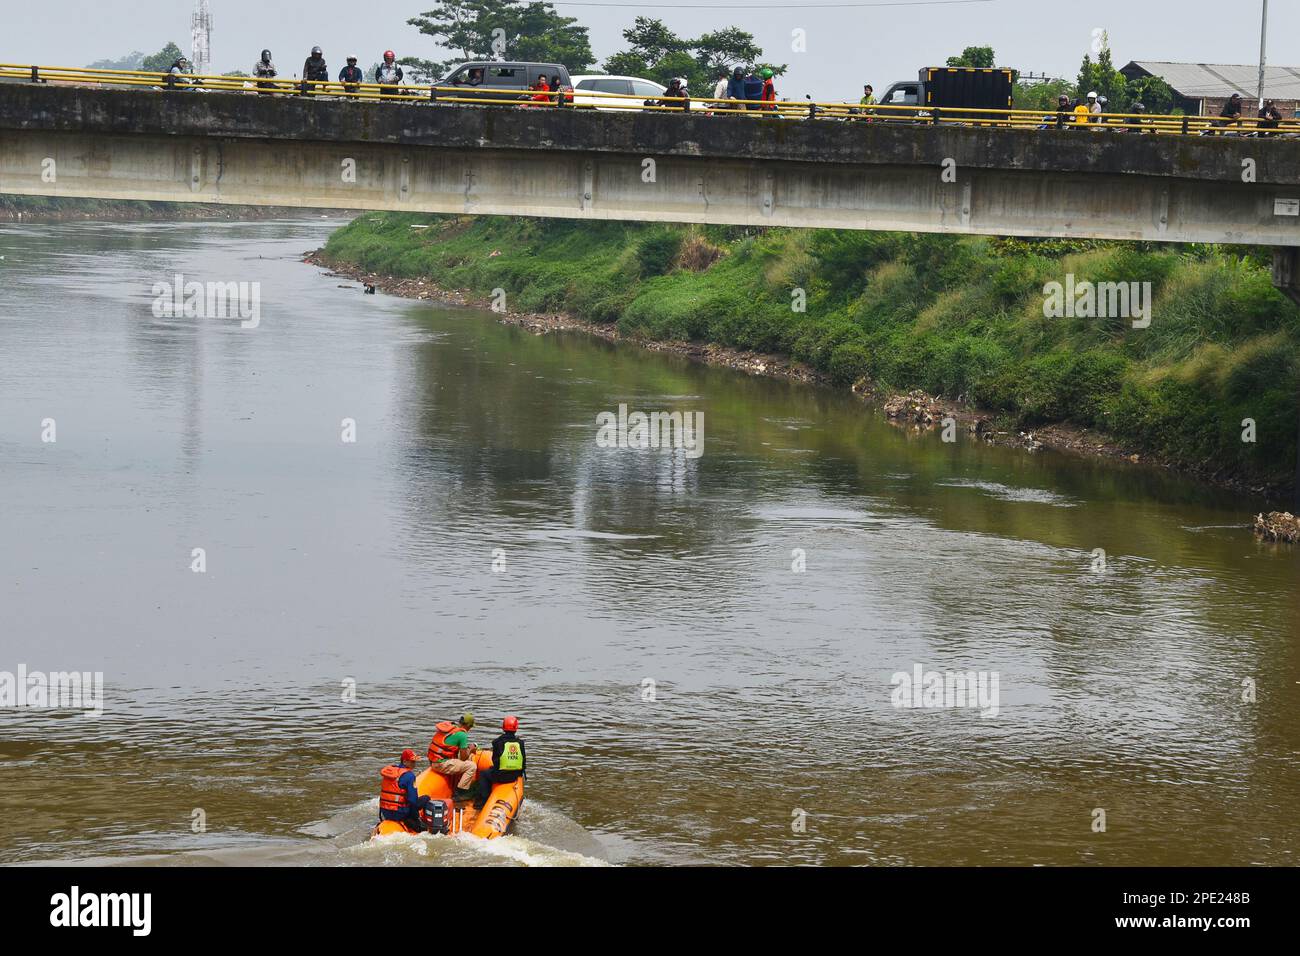 Bandung, Indonesia. 14th Mar, 2023. Rescue team search for a child who drowned in the Citarum River, Jelegong Village, Kutawaringin District, Bandung Regency, Indonesia on March 14, 2023. (Photo by Dimas Rachmatsyah/INA Photo Agency/Sipa USA) Credit: Sipa USA/Alamy Live News Stock Photo